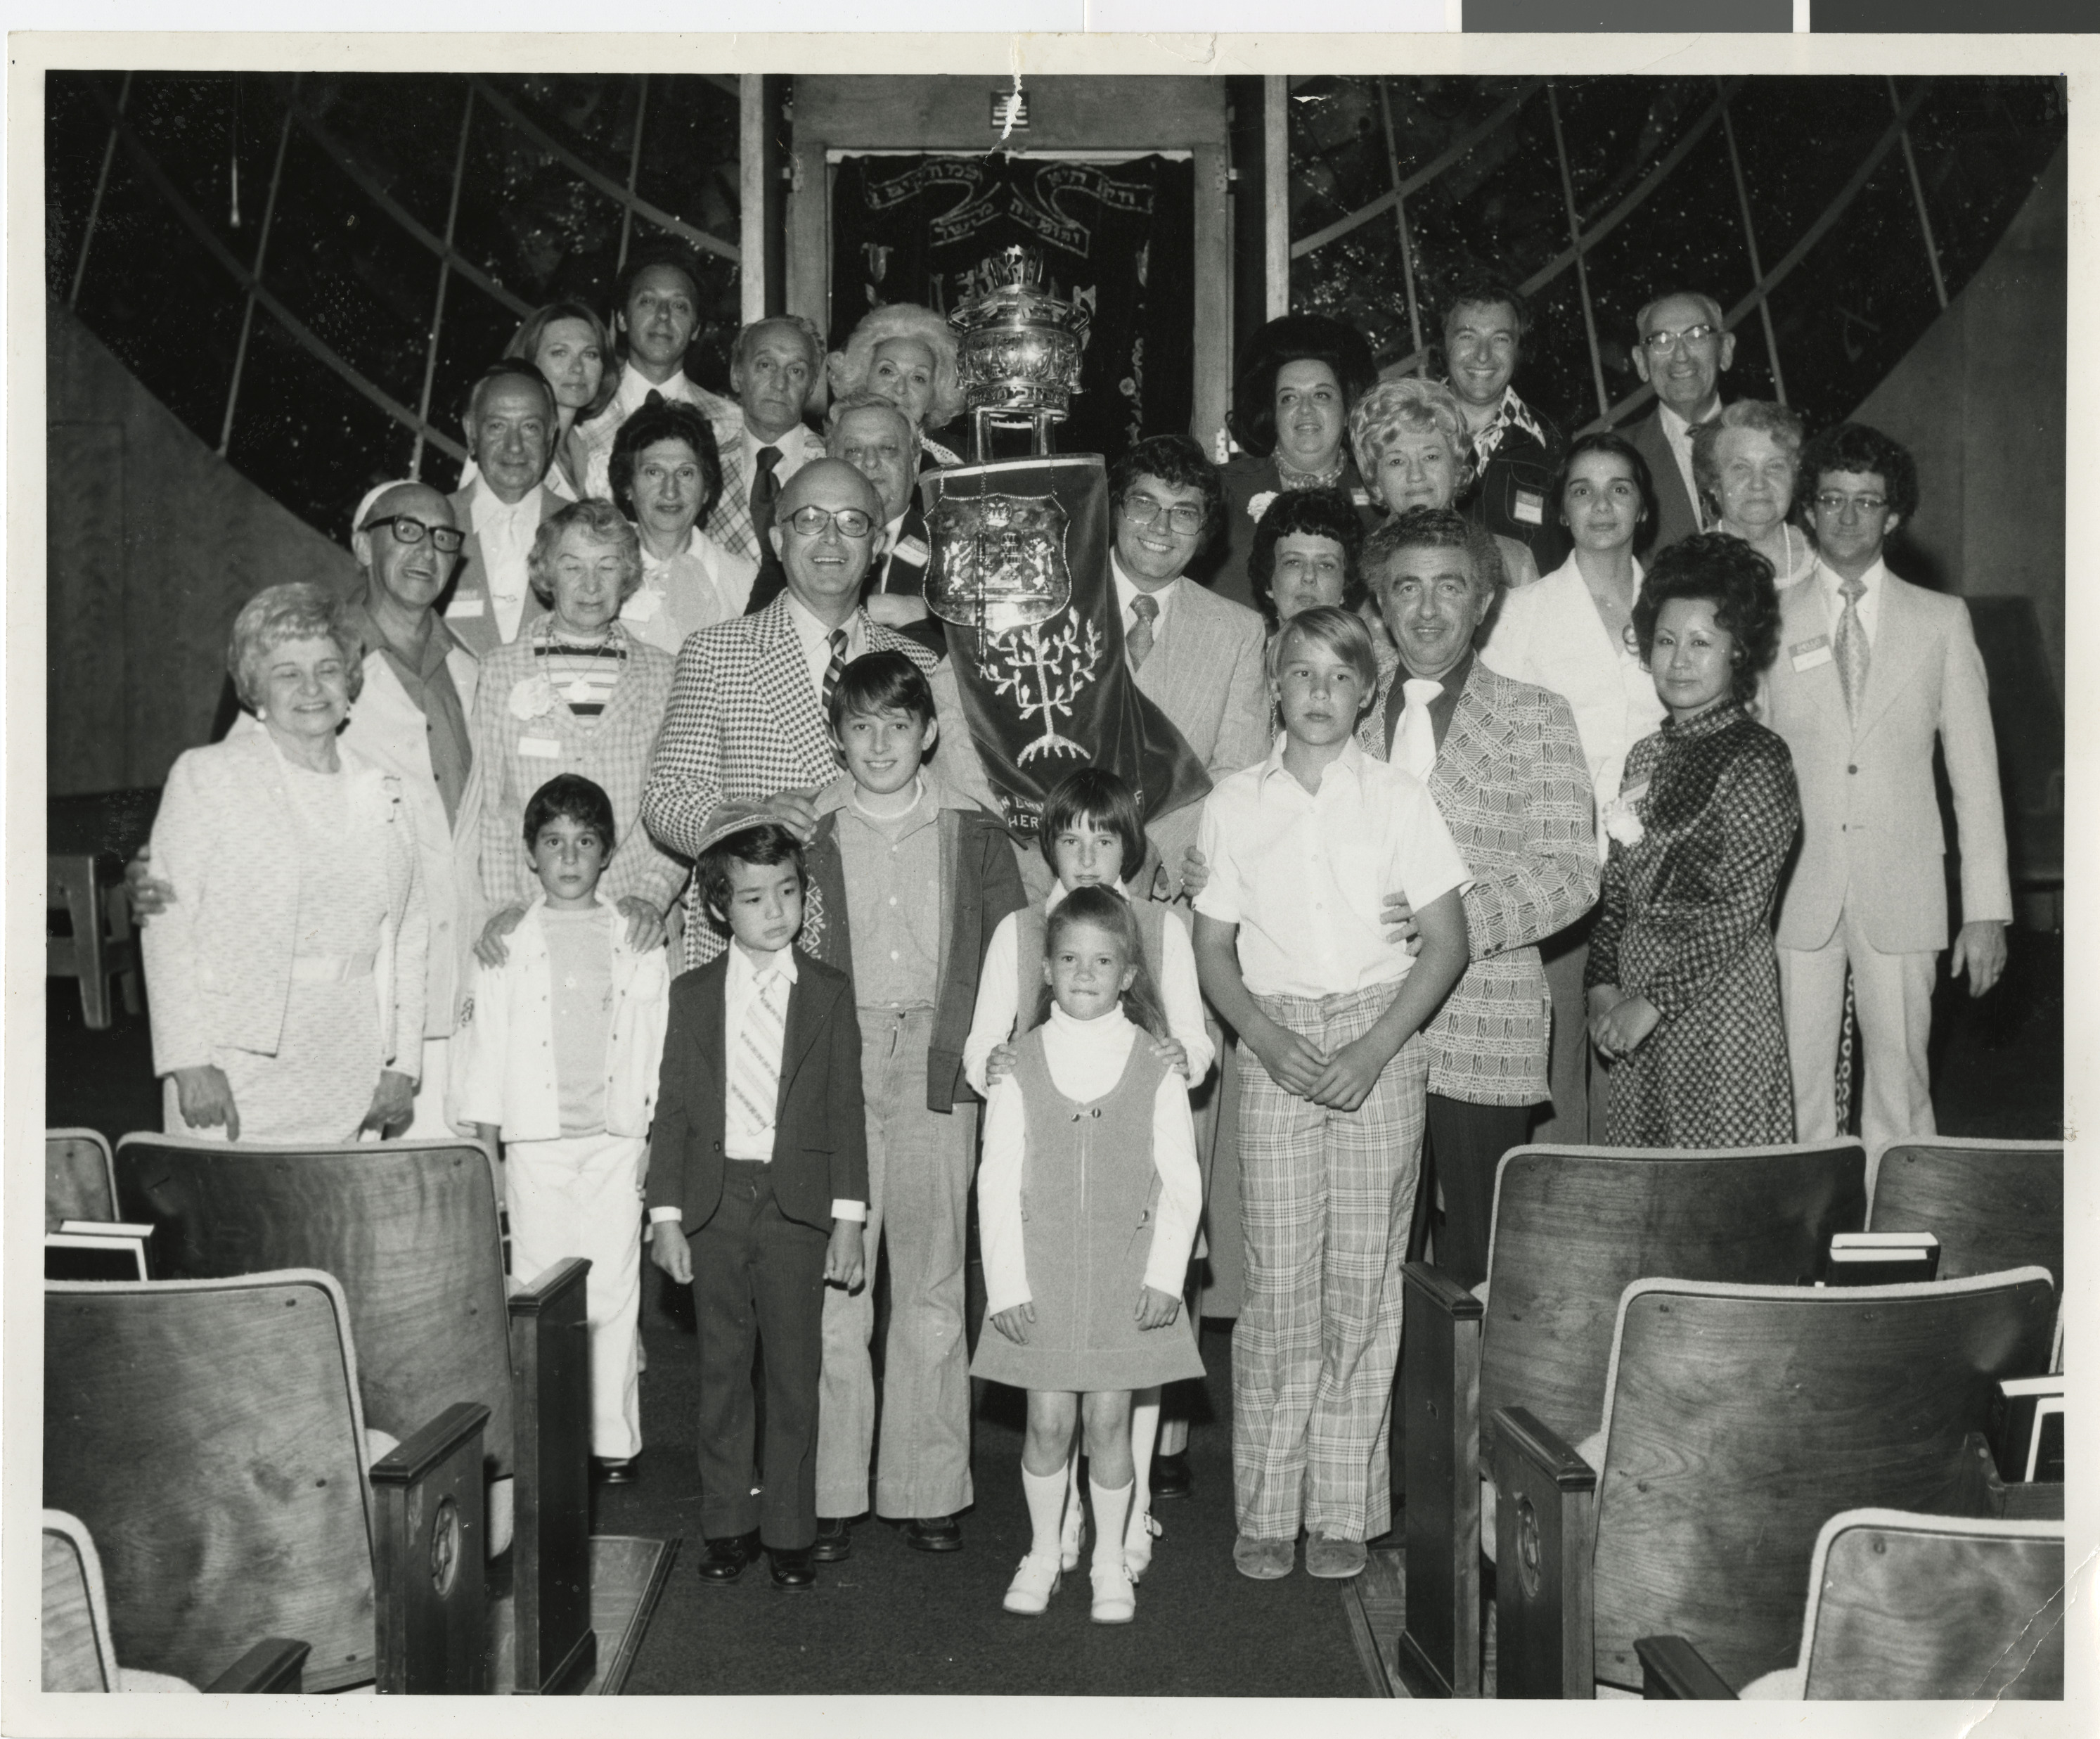 Photograph of new members of Temple Beth Sholom, June 4, 1976